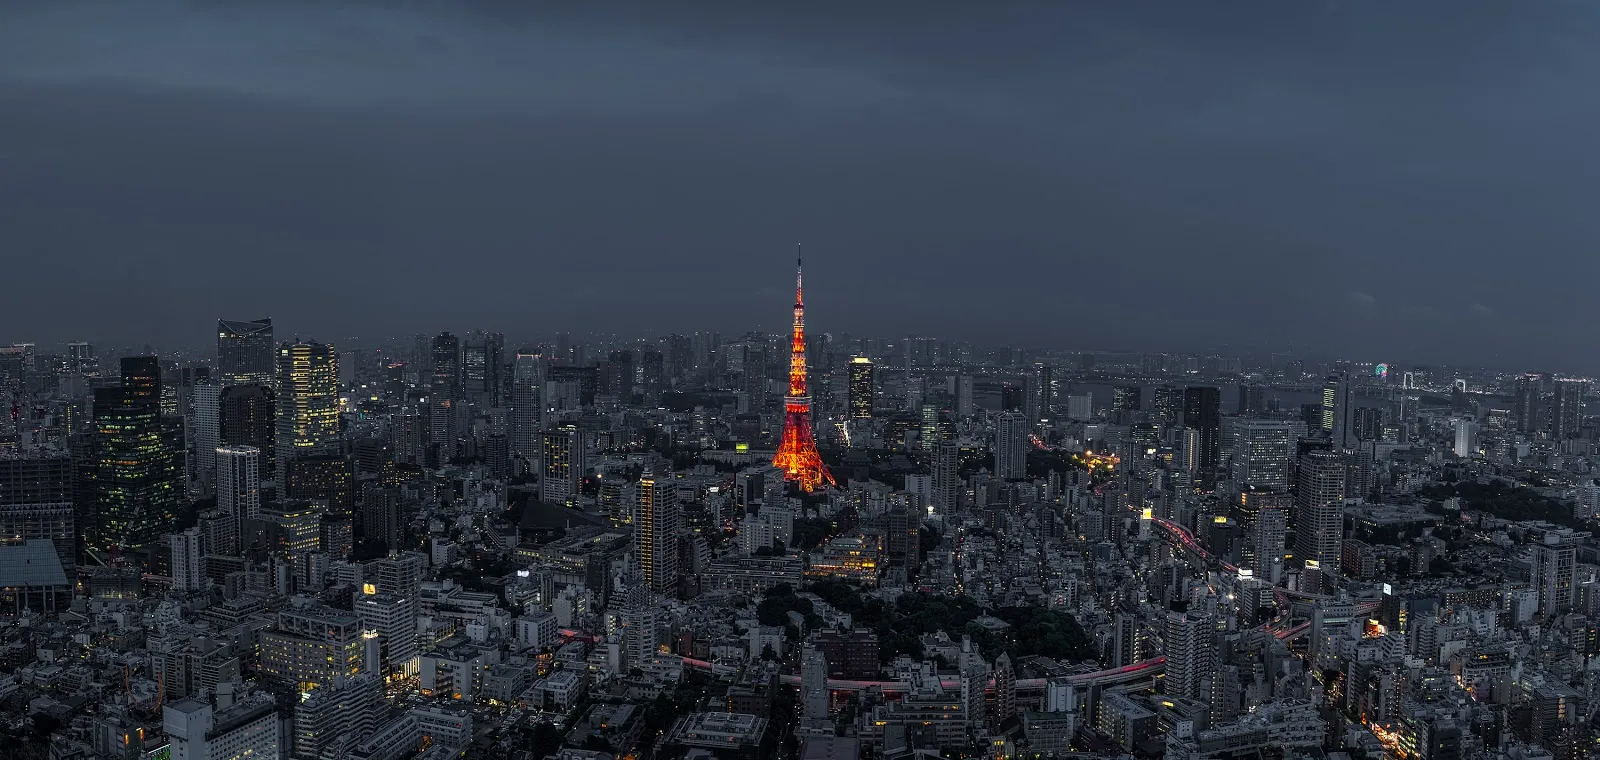 A view of the Tokyo skyline at night with the Tokyo Tower lit up.